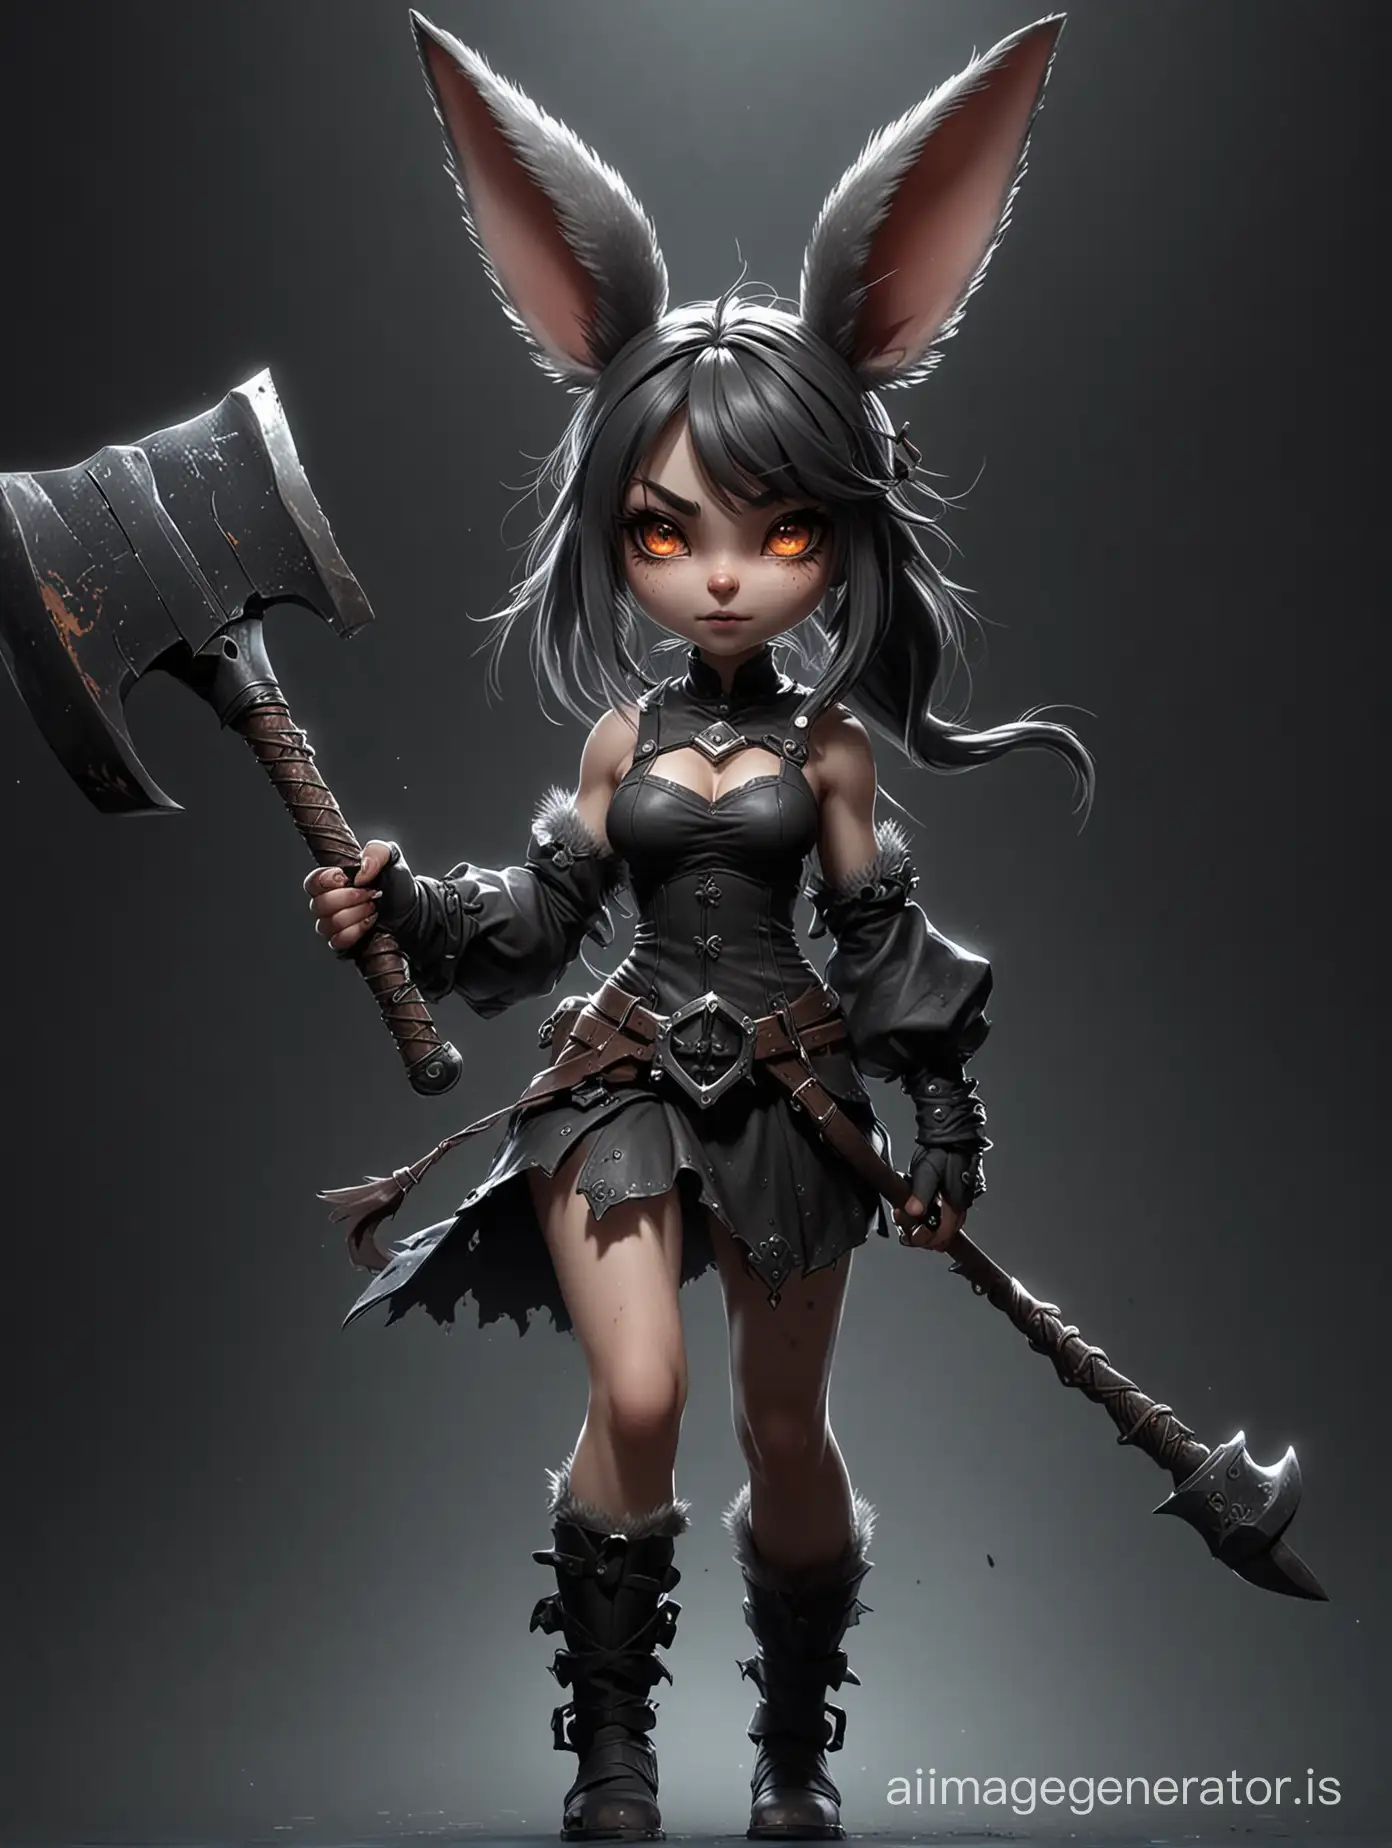 Demonic rabbit girl, with big ears, dark colors, axe in paw, 3D, rendering, HD, proportionality, vector, illustration, fantasy, anime. Ominous dark background with shimmer.